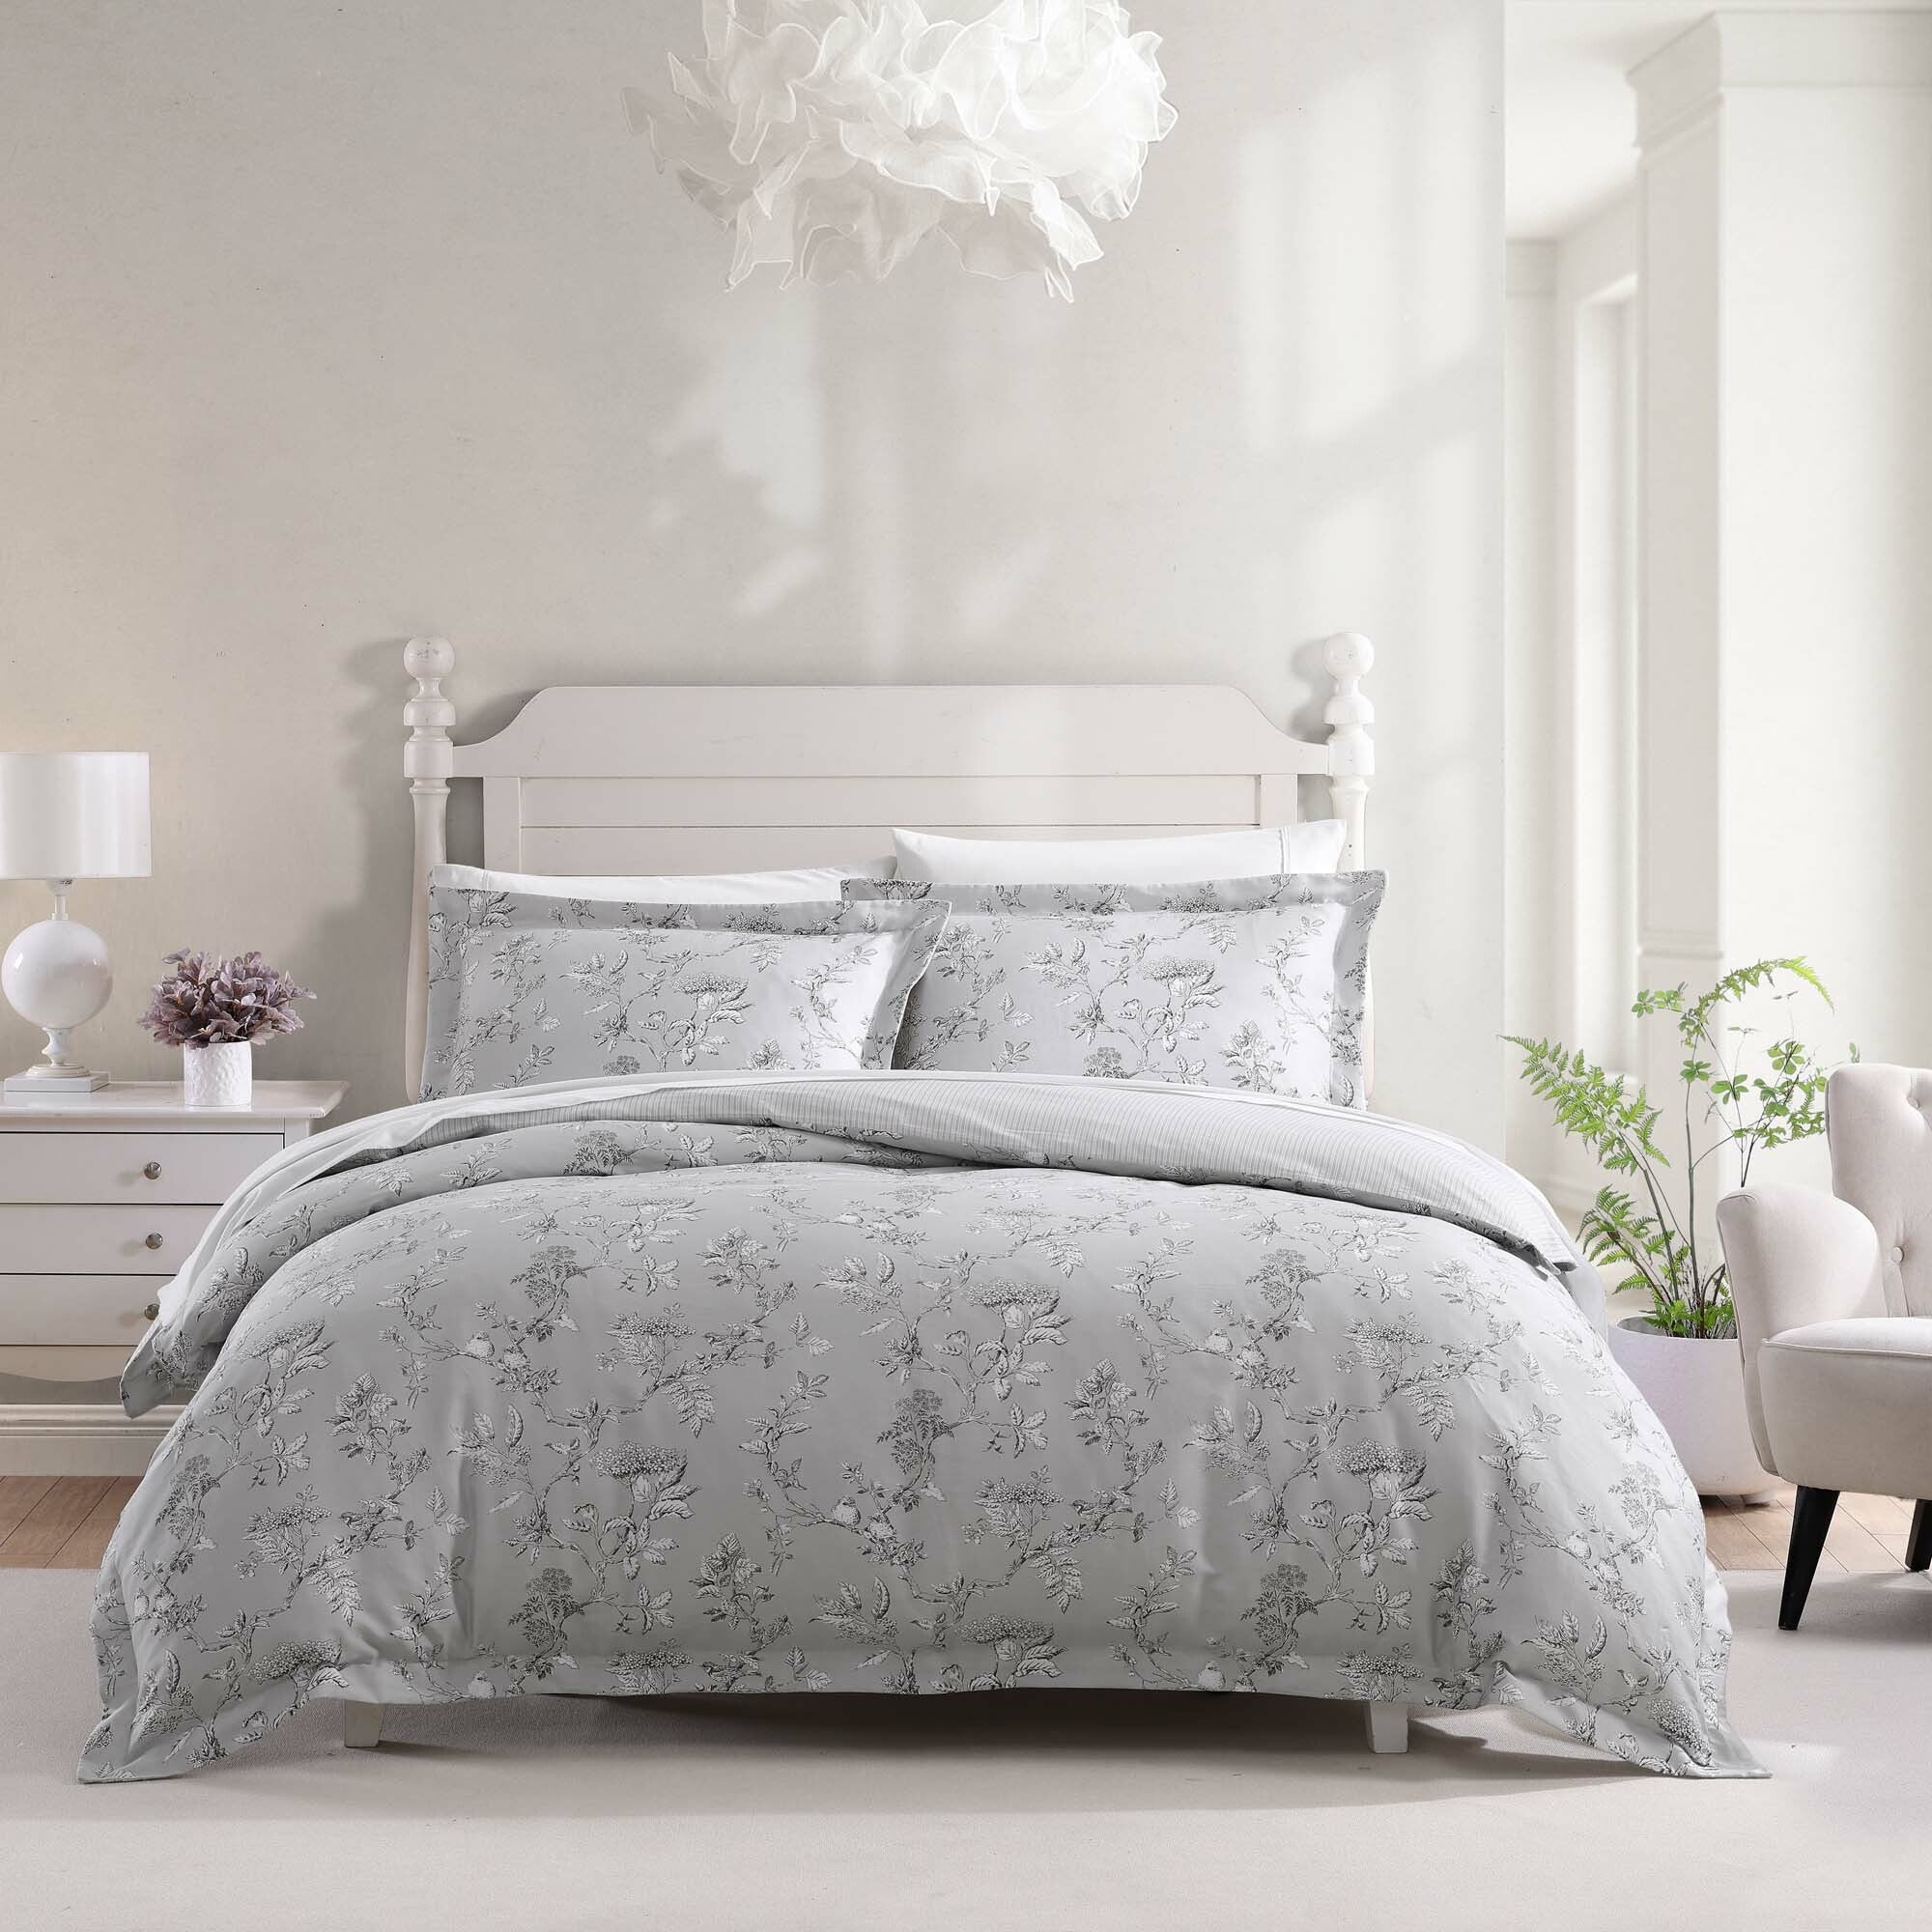 The Elderwood Quilt Cover Set Range Steel by Laura Ashley has a quintessentially English country style with its beautiful soft birds print. The hand drawn line work is intricate and sentimental while boasting a fresh colour palette for the season ahead. Available in a range of colours.